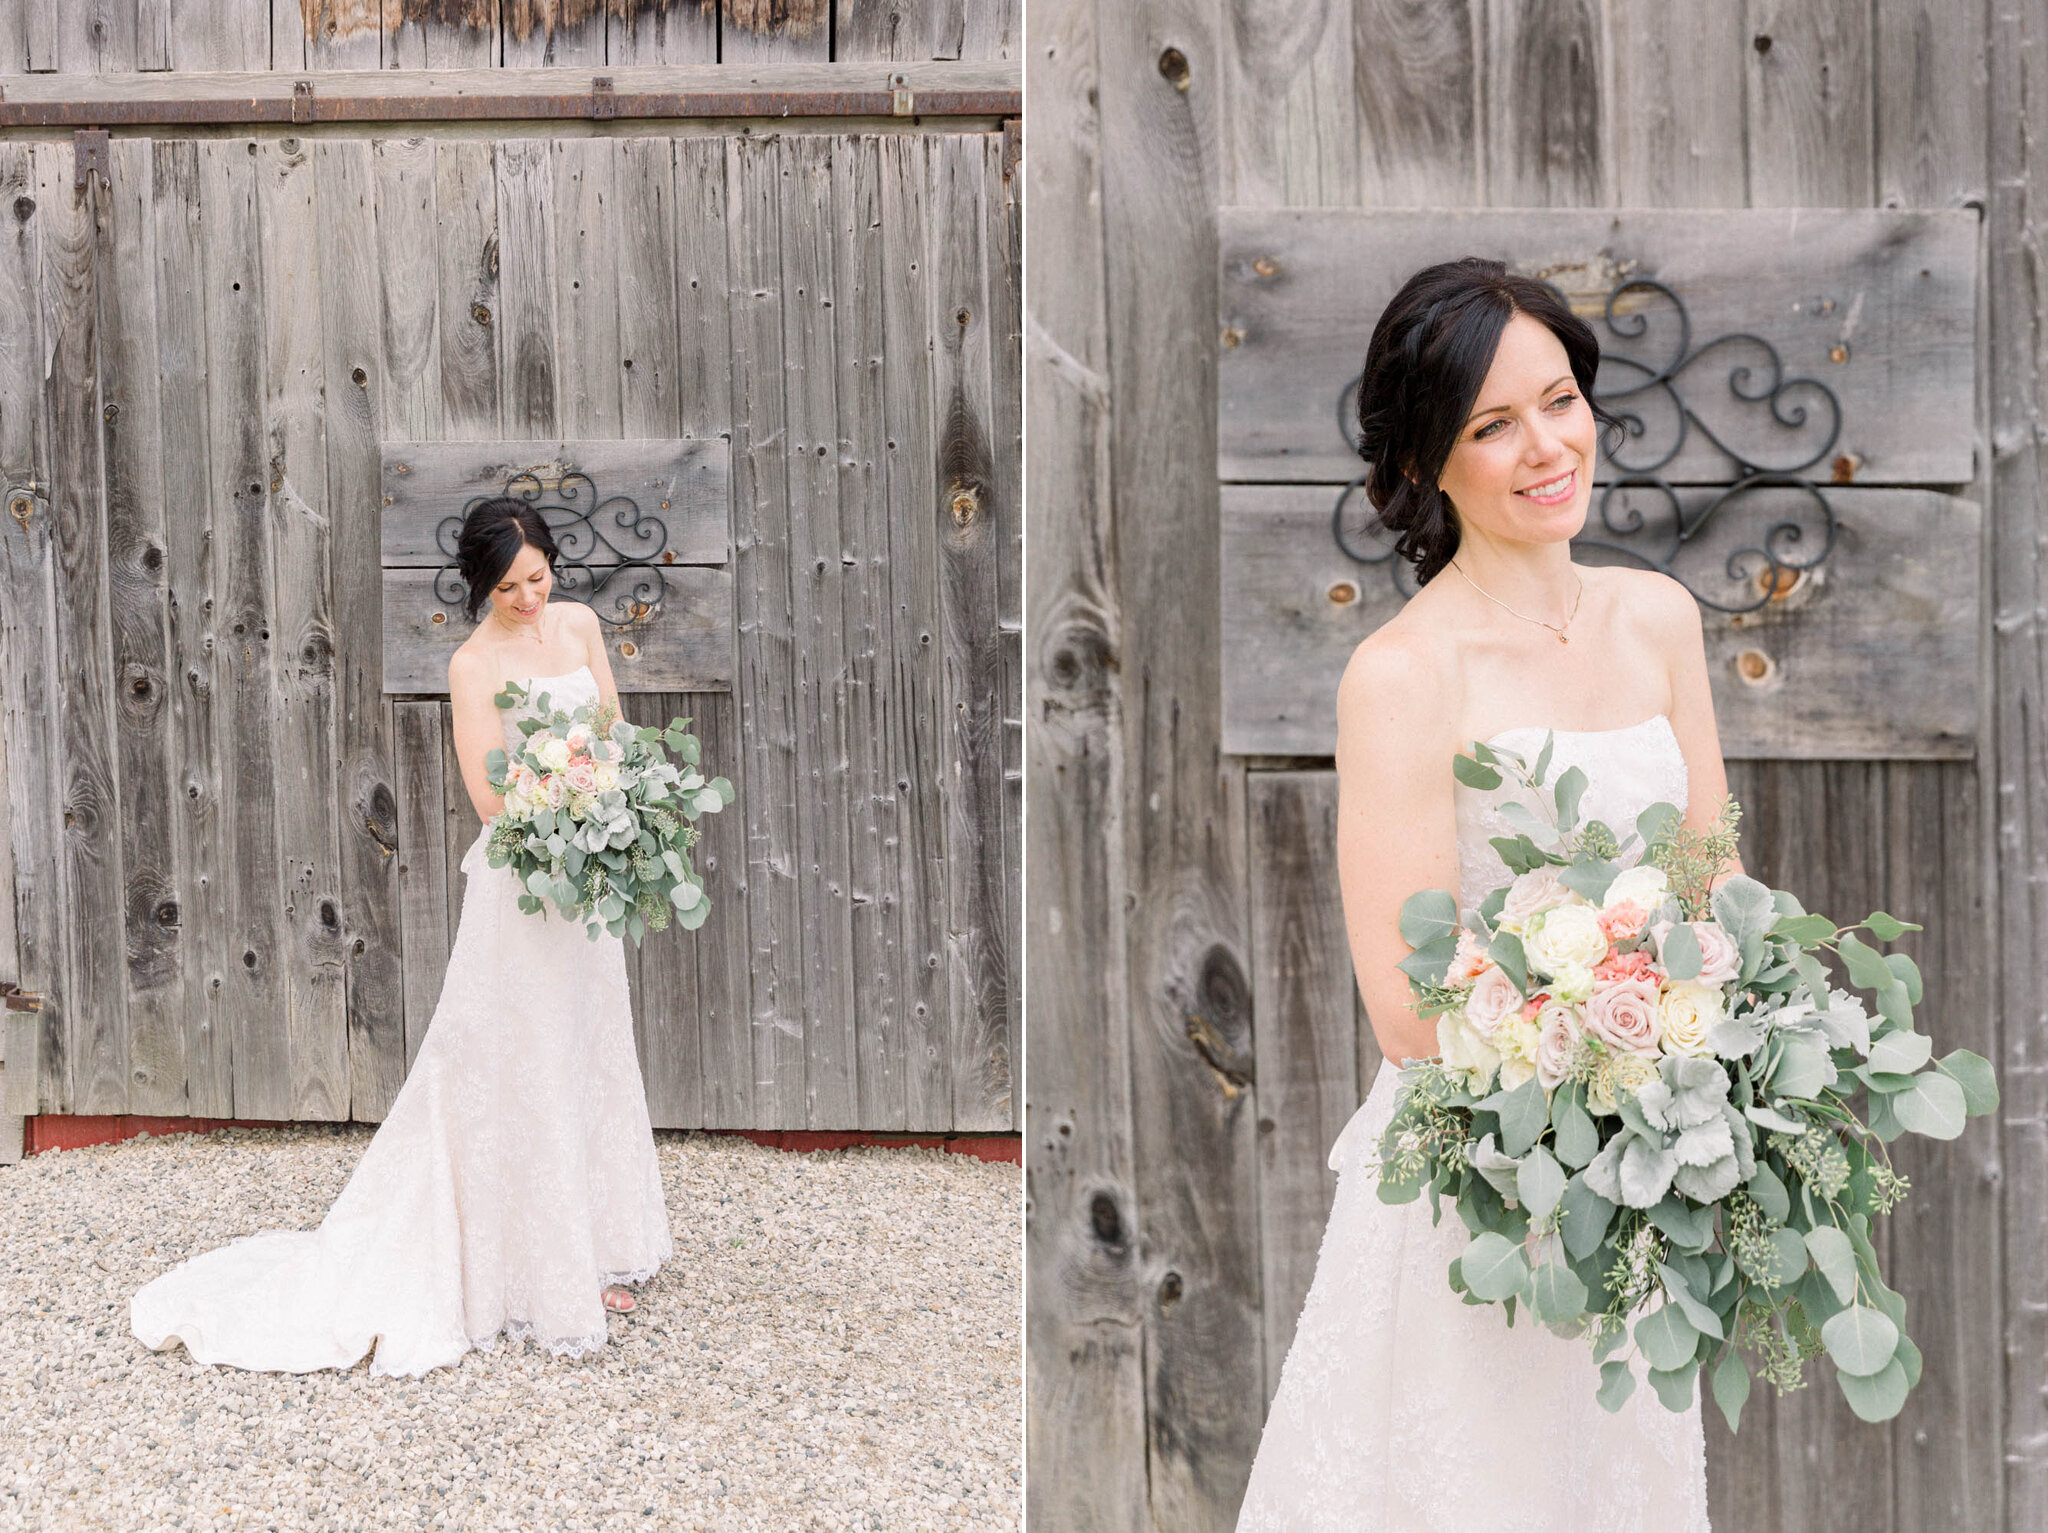 Bridal portraits in front of rustic barn at Walters Falls Inn an